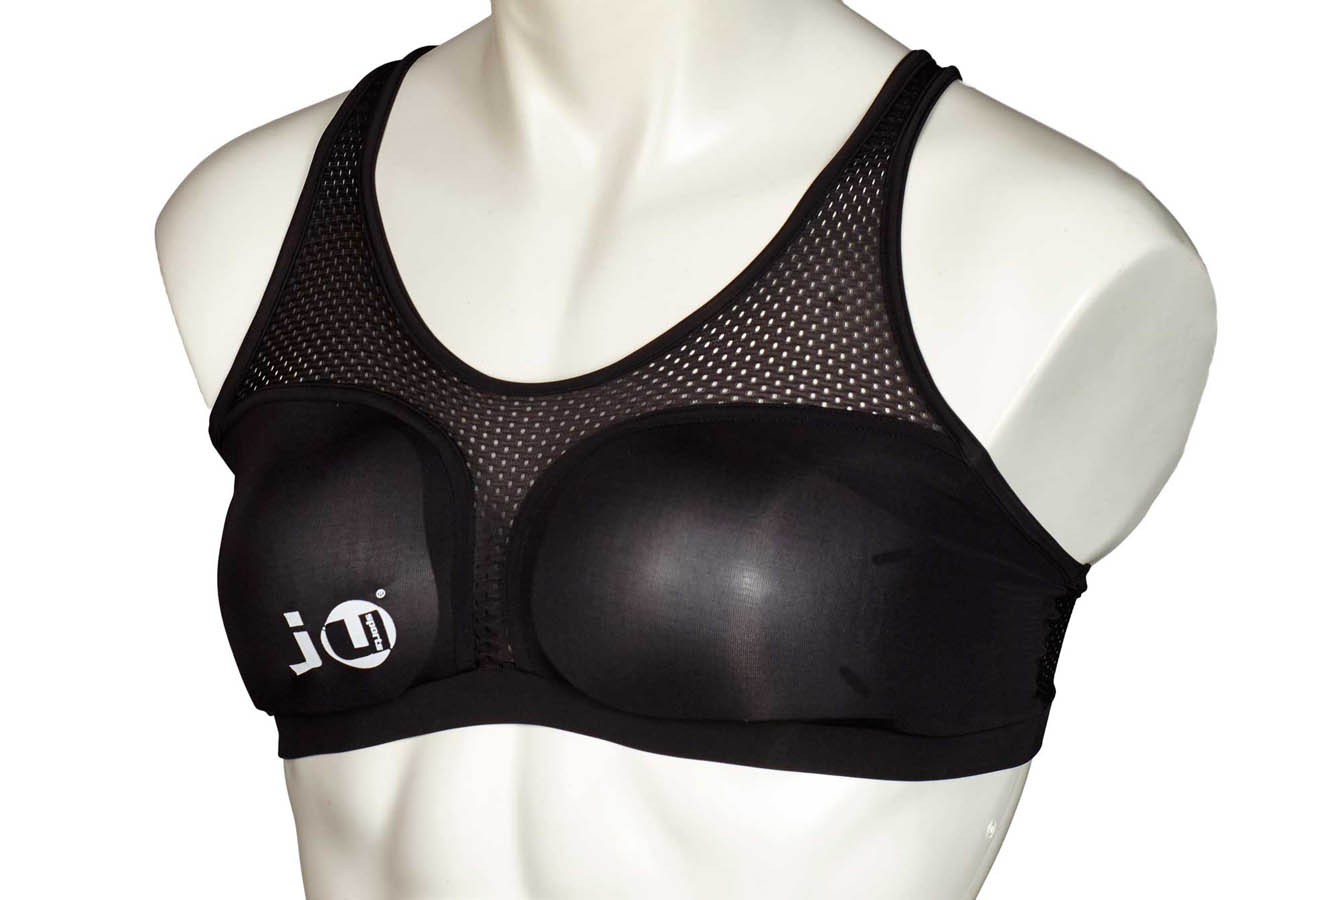 Ju-Sports Women's Chest Protector Cool Guard Complete Black